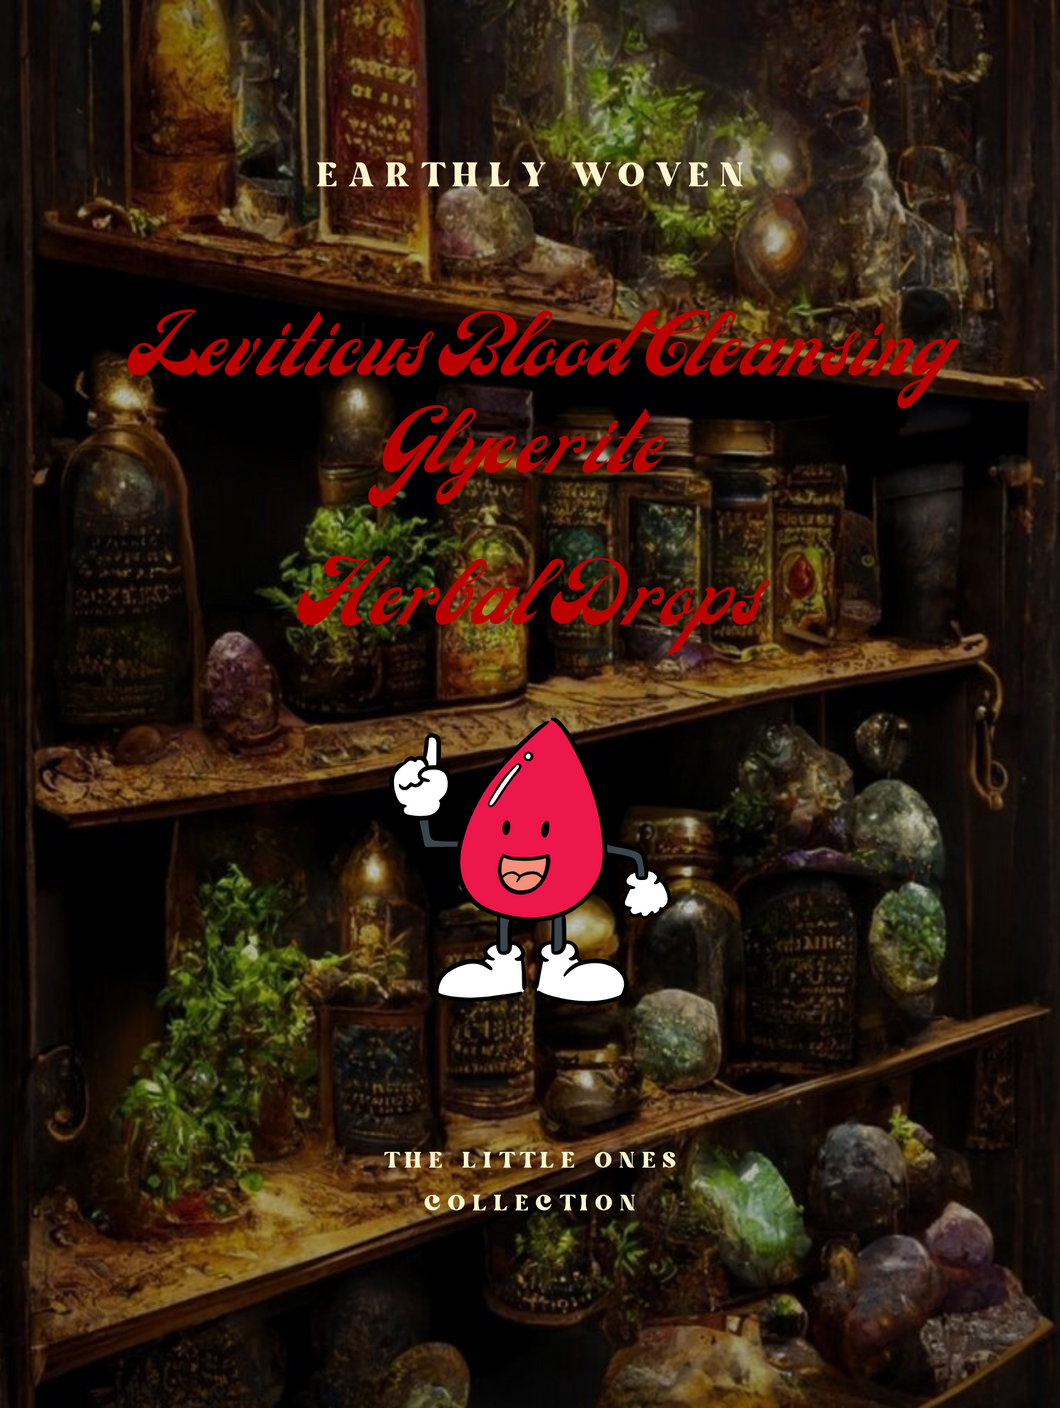 The Leviticus Blood Cleansing Herbal Drops